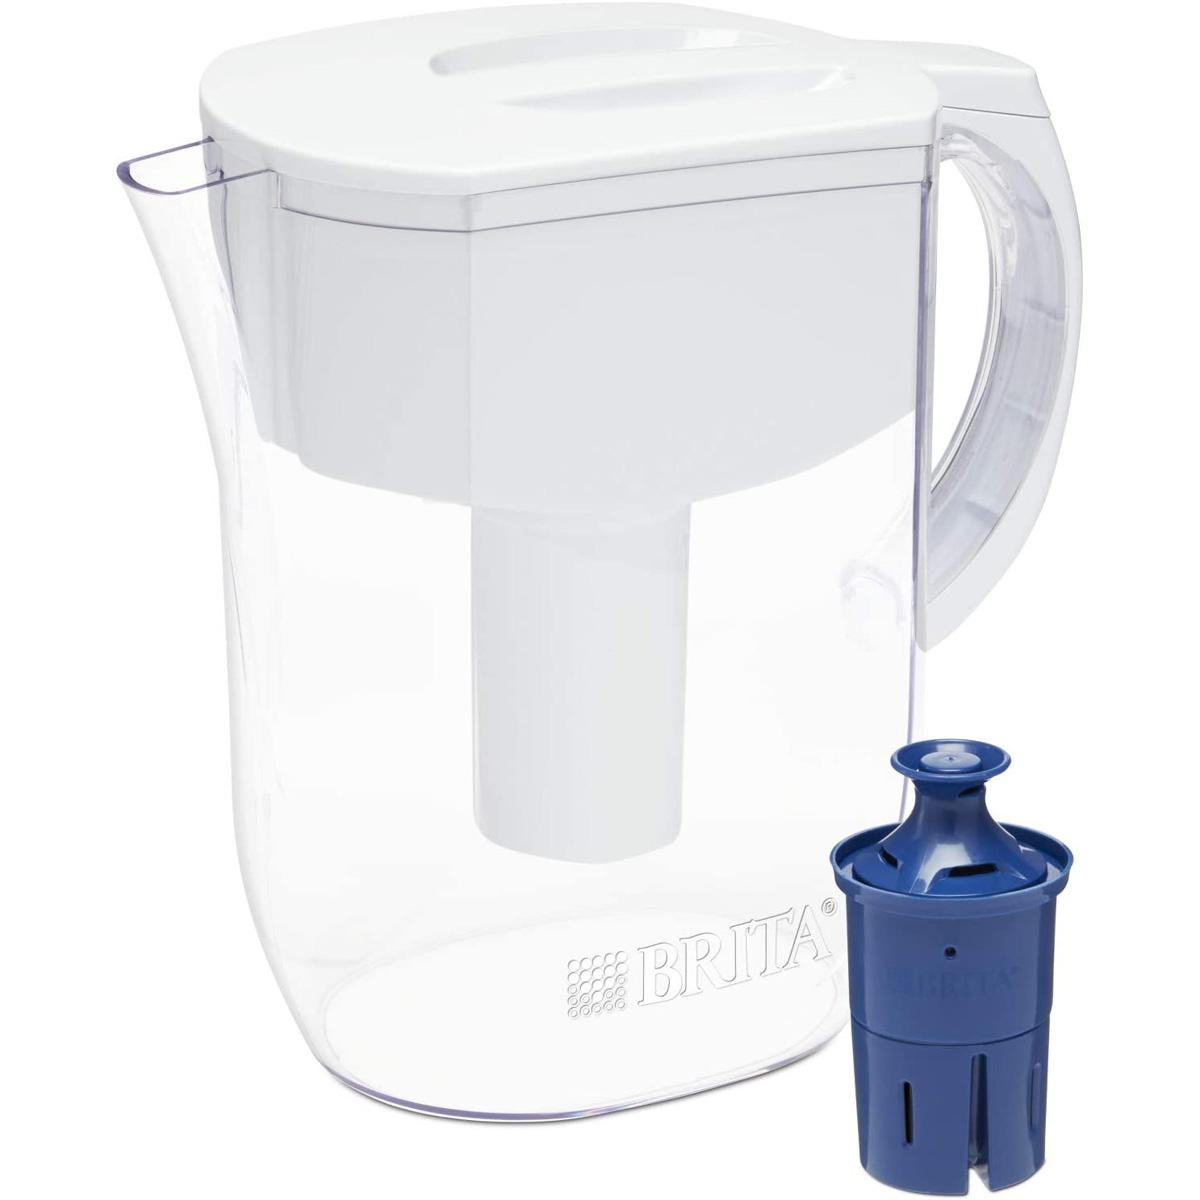 Brita Longlast Everyday Water Filter Pitcher for $24.49